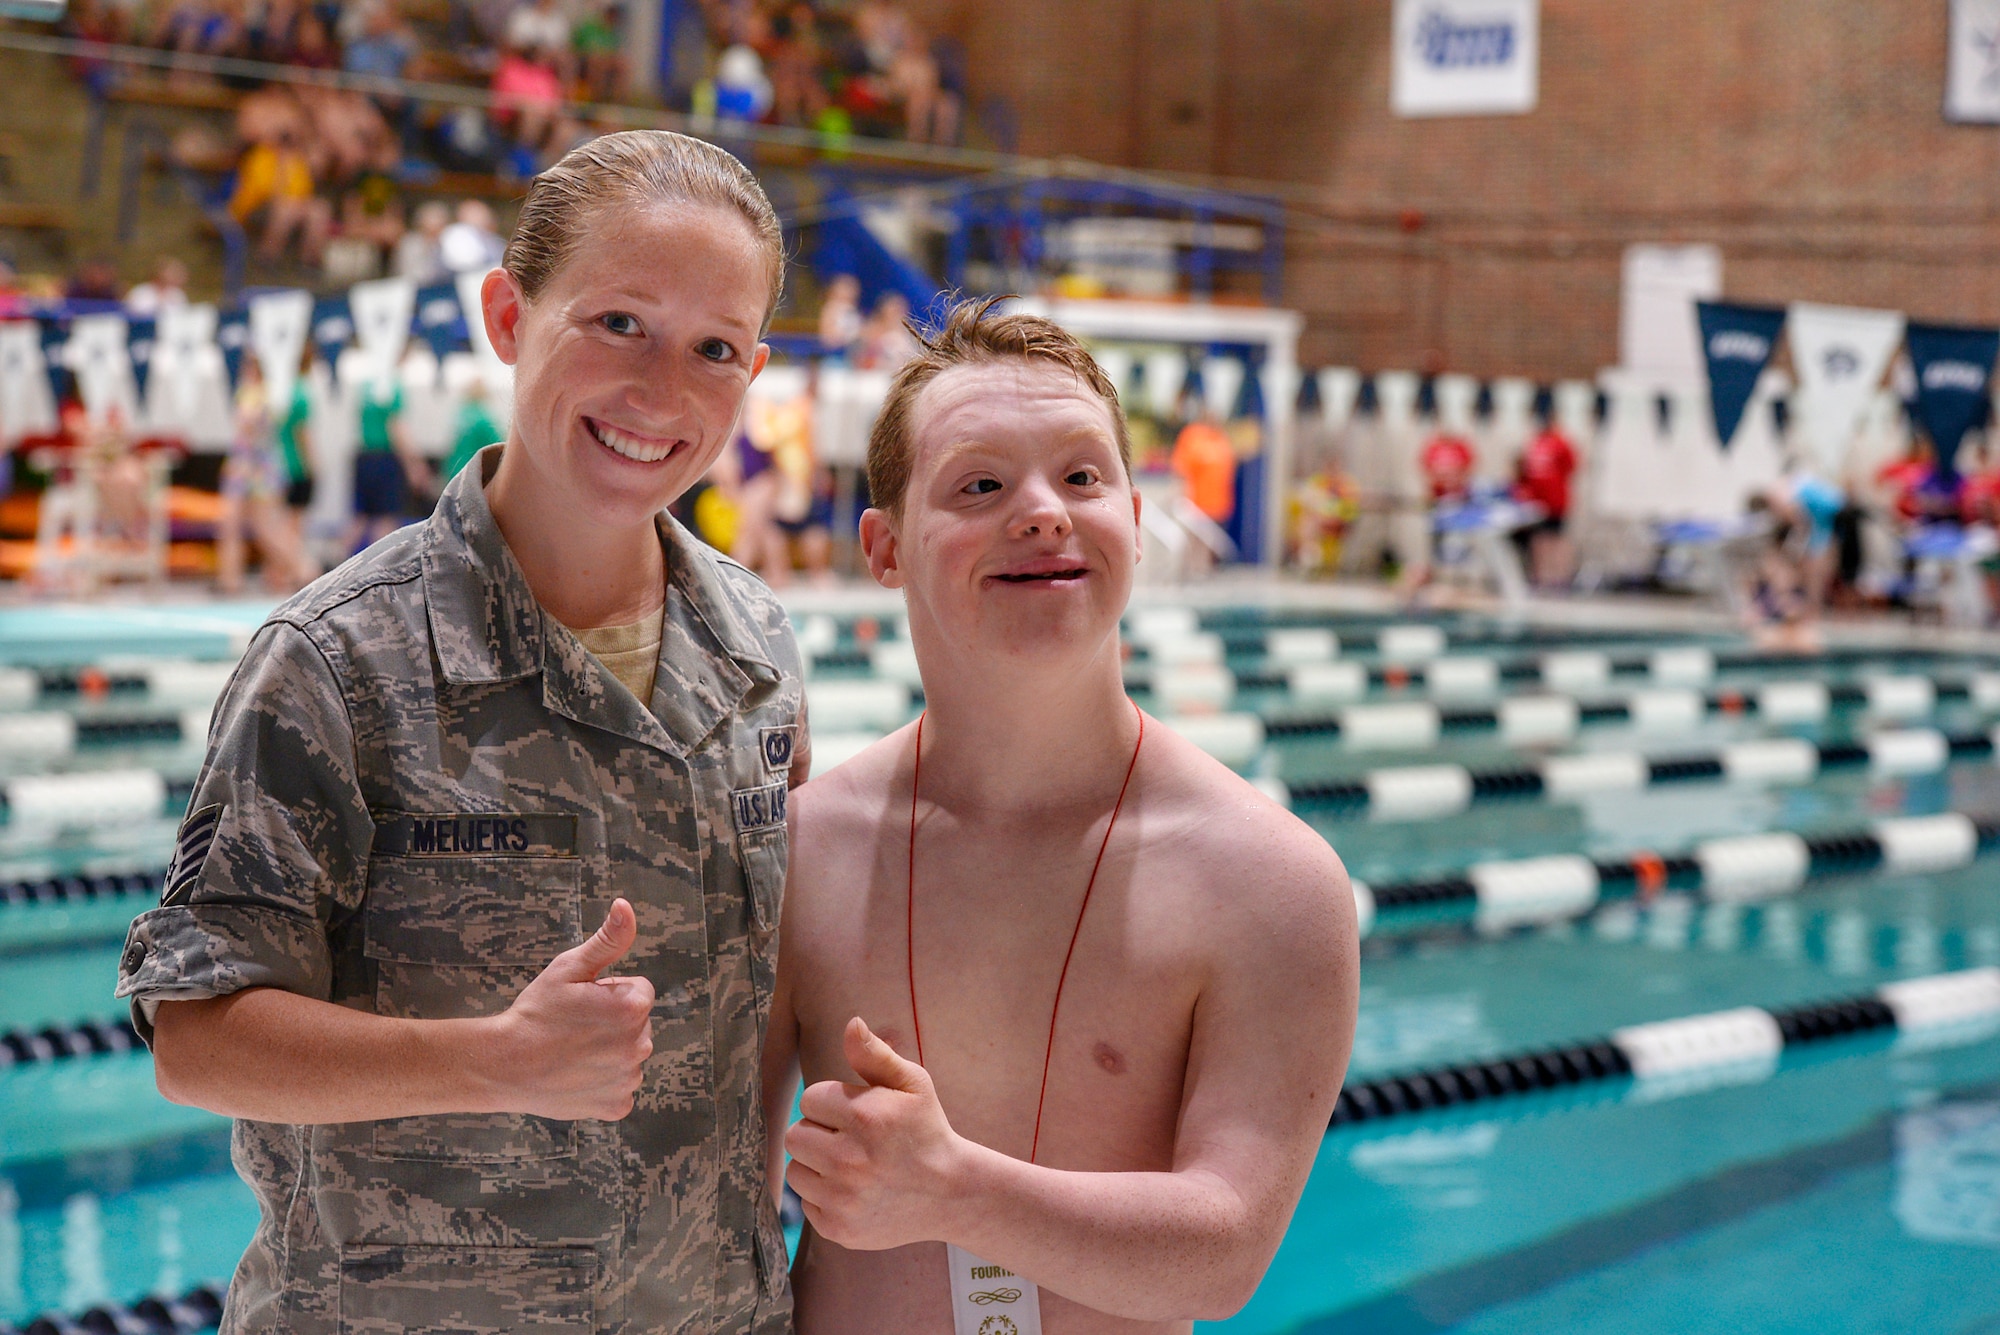 Staff Sgt. Beverly C. Meijers, 157th Air Refueling Wing command post controller, poses for a portrait with her brother, Simon Cole, on June 1, 2018 at the University of New Hampshire Swasey Pool in Durham, N.H. Meijers presented Cole with an award for his participation in the 25 meter swimming event during the Summer 2018 N.H. Special Olympics. (N.H. Air National Guard photo by Staff Sgt. Kayla White)